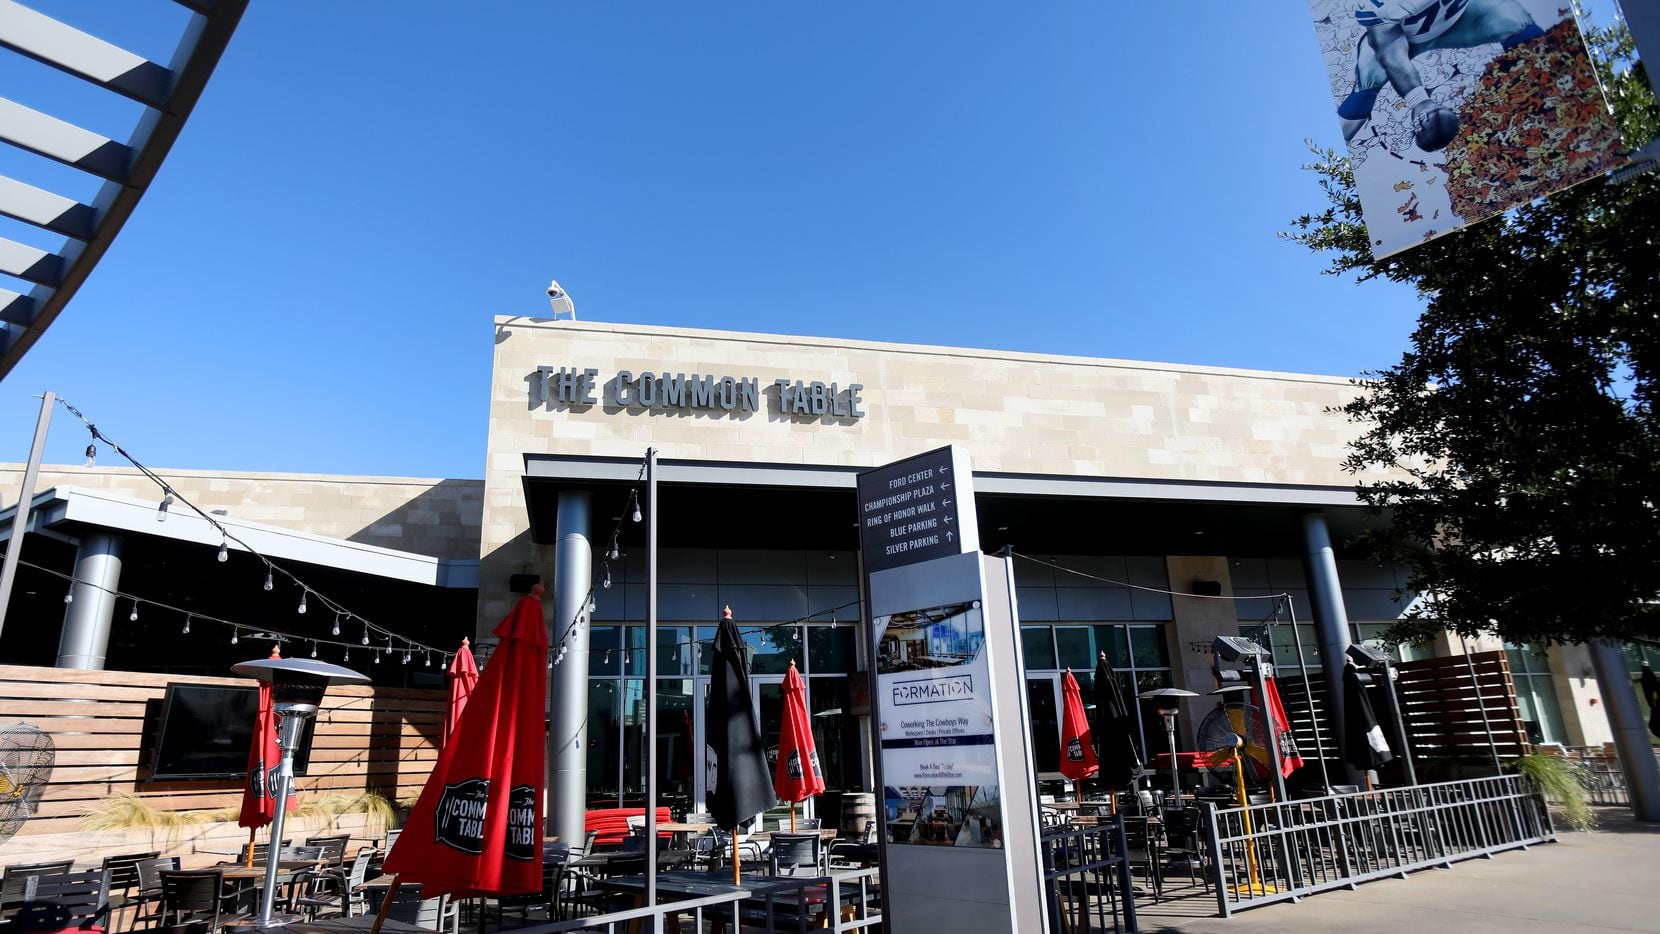 The Common Table at the Frisco Star in Frisco, Texas, Monday, October 21, 2019. (Anja...